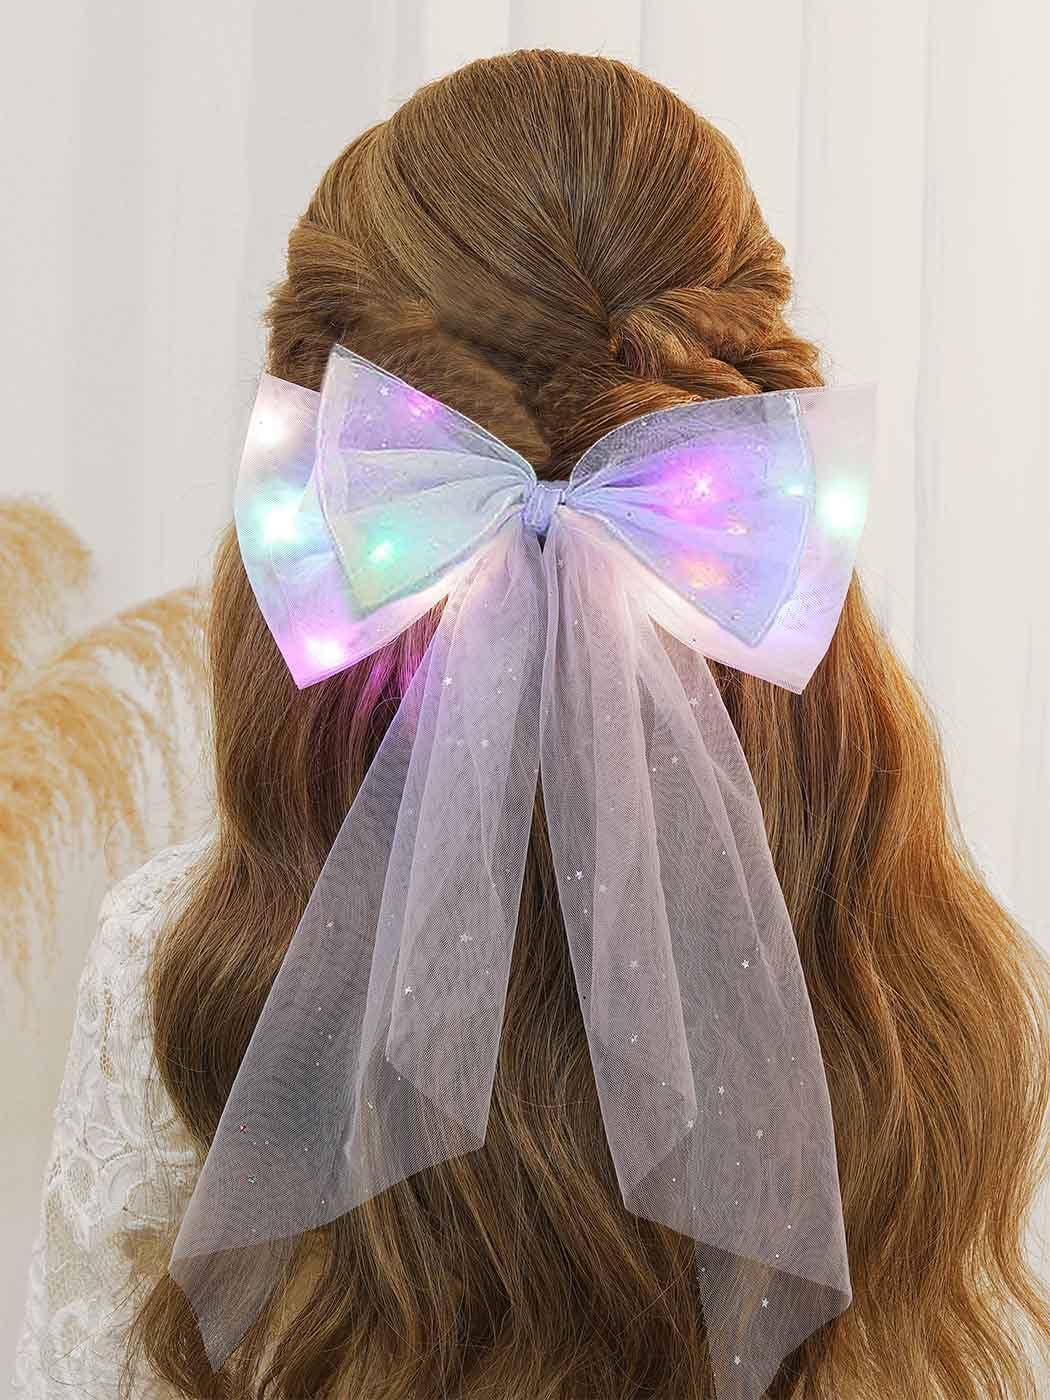  JONKY Light Up Bride to Be Veil Headband Led White Headbands  Bridal Short Veils Headpiece Tulle Bachelorette Party Hair Accessories for  Women and Girls : Beauty & Personal Care